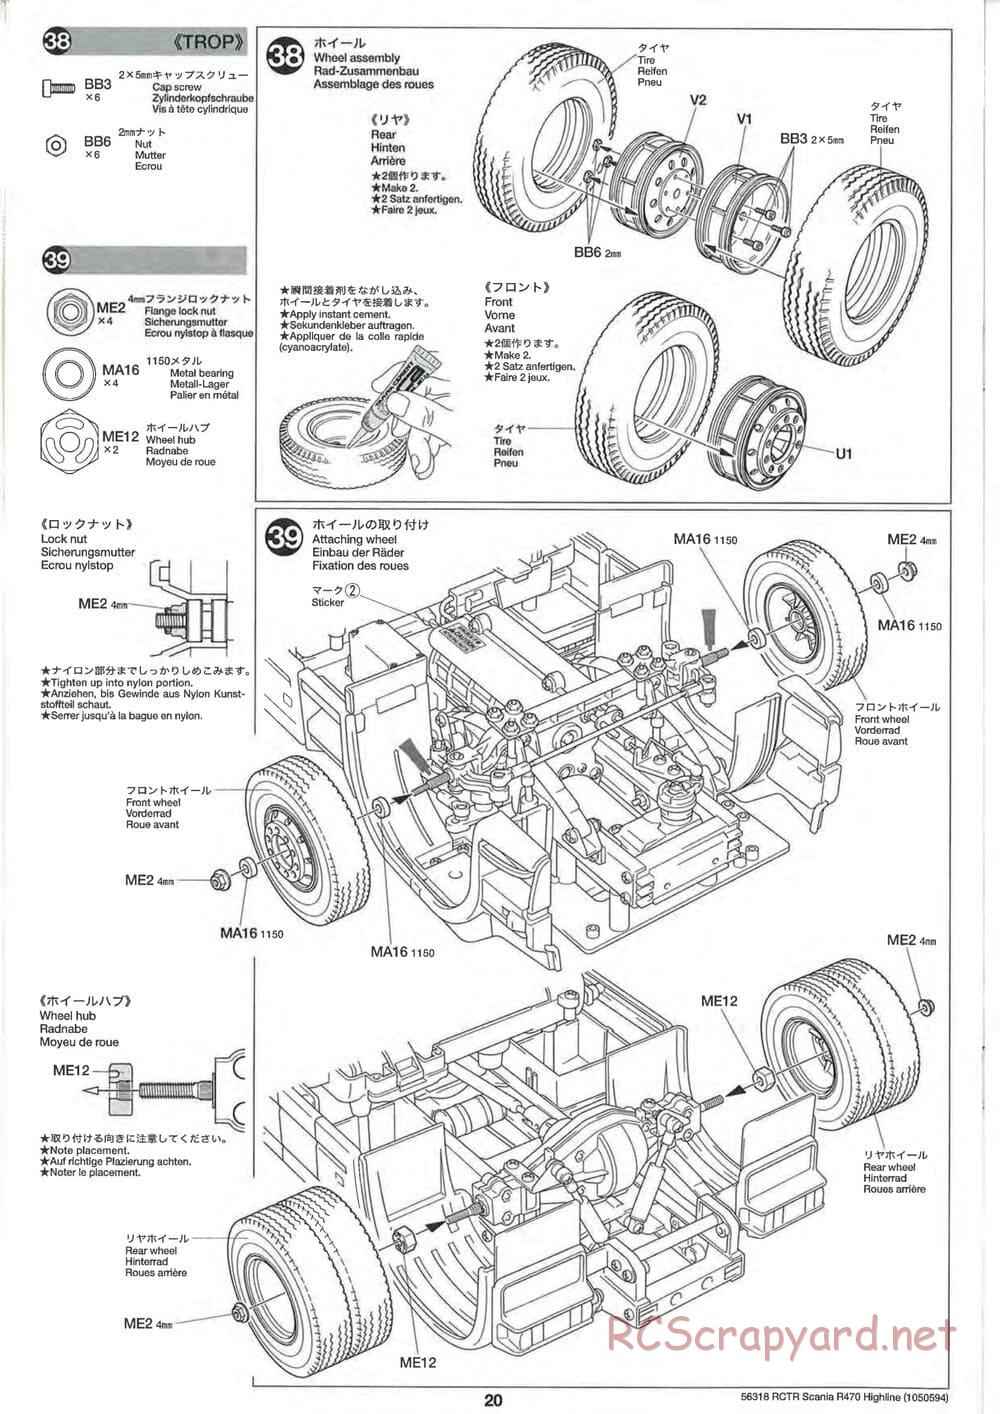 Tamiya - Scania R470 Highline Tractor Truck Chassis - Manual - Page 20